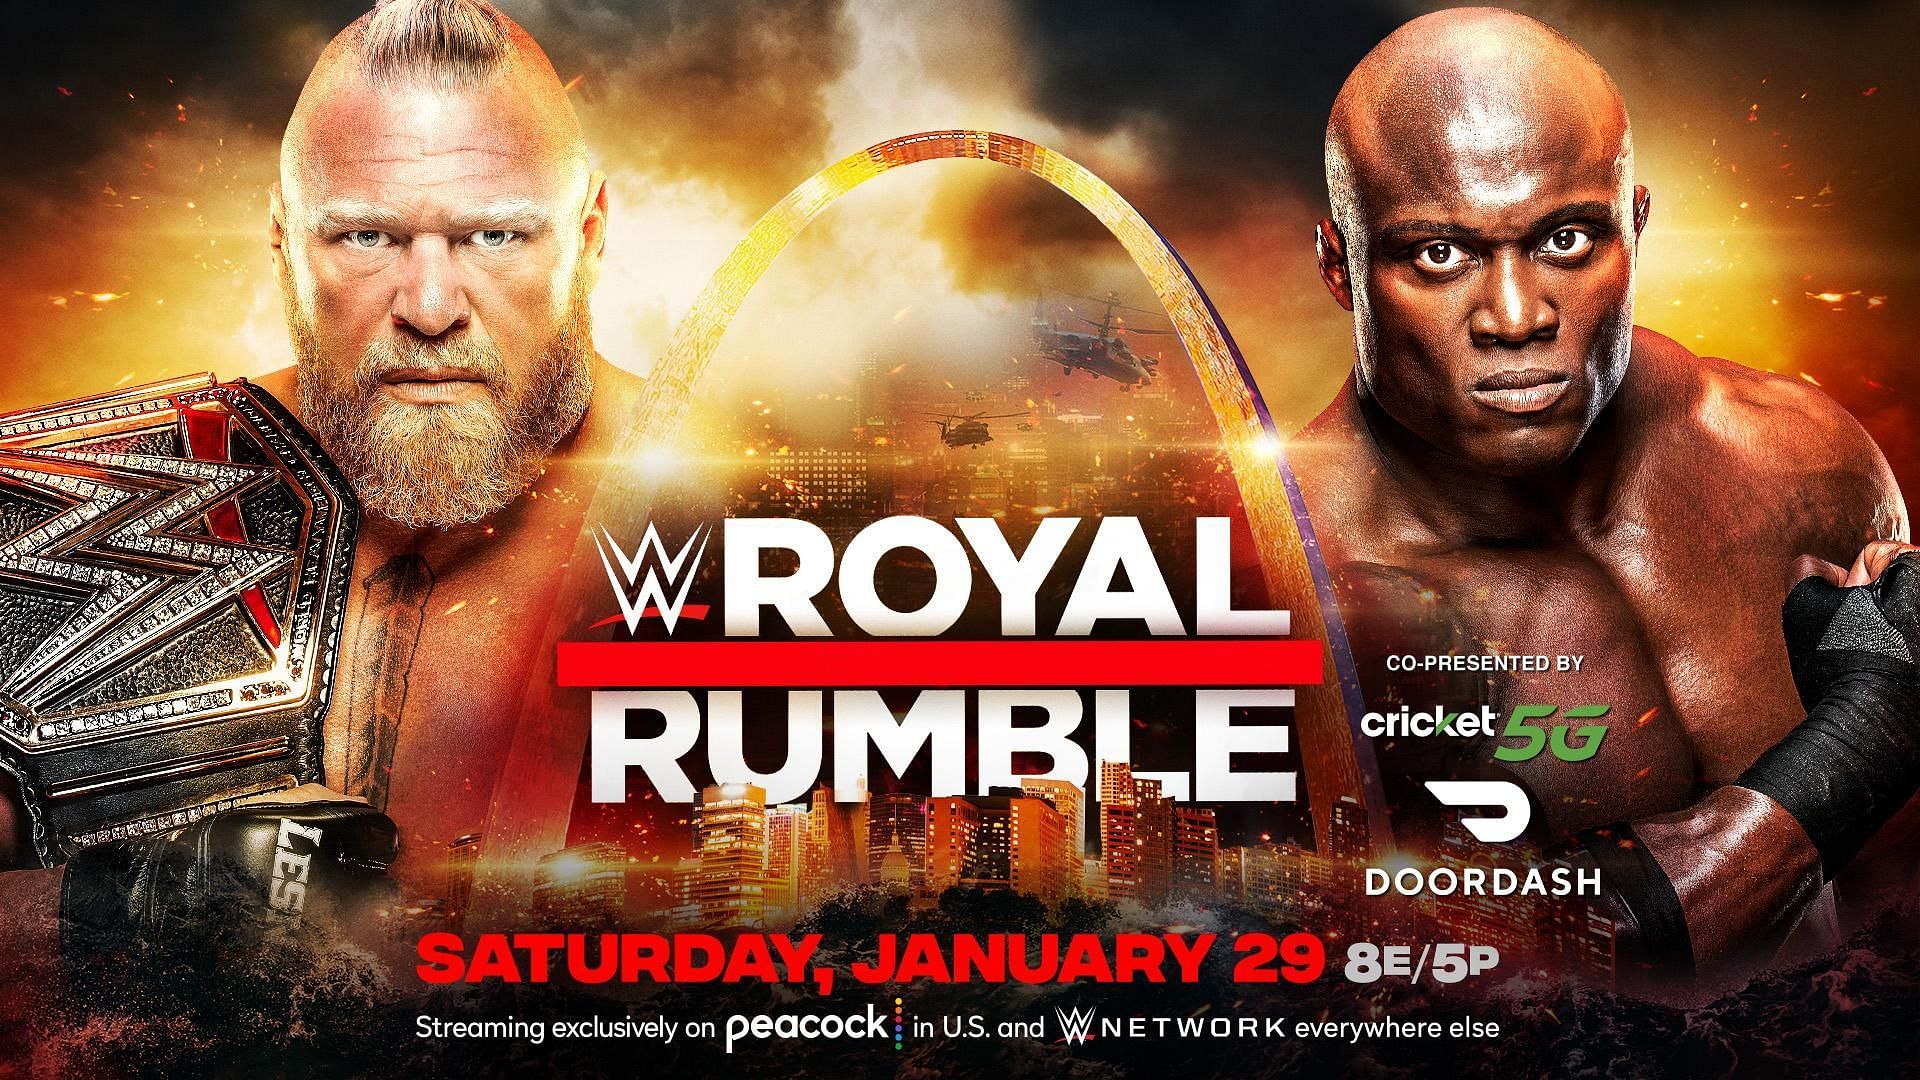 Brock vs. Bobby could steal the show at the Royal Rumble.